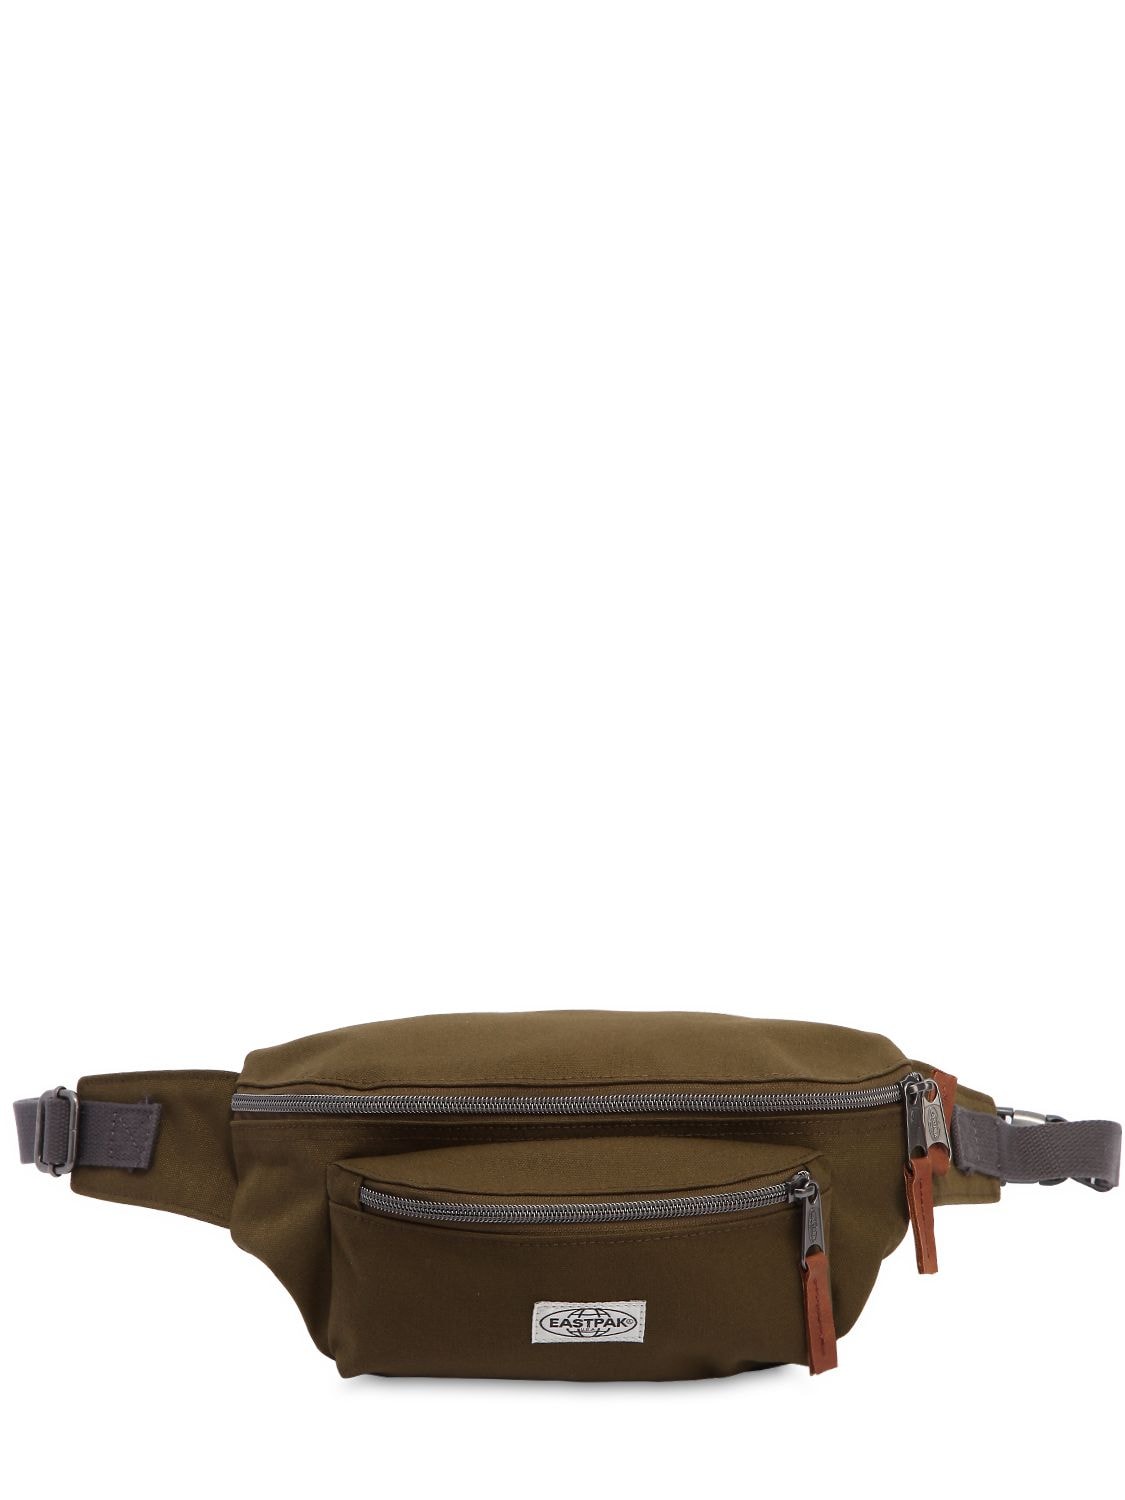 Eastpak Doggy Bag Opgrade Nylon Belt Pack In Army Green